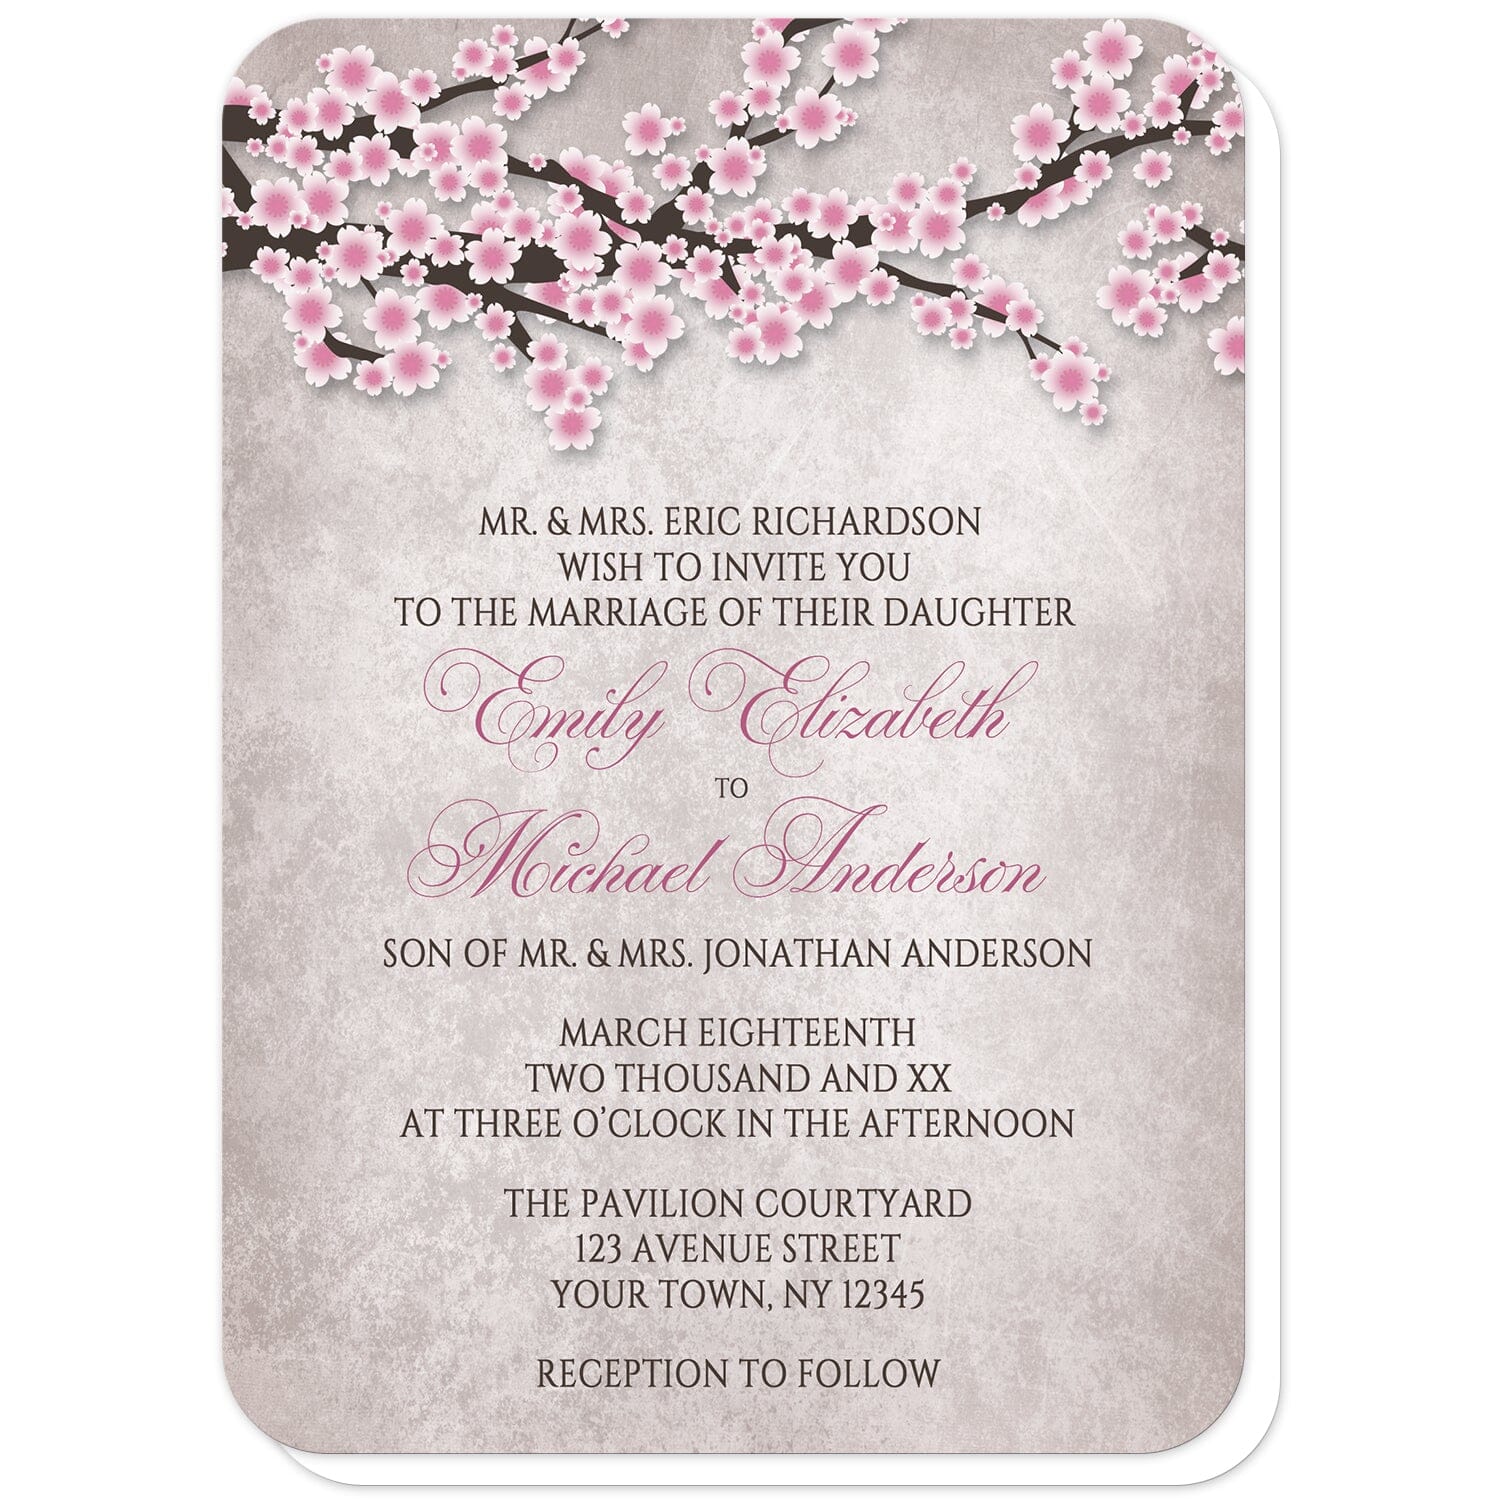 Rustic Pink Cherry Blossom Wedding Invitations (with rounded corners) at Artistically Invited. Rustic pink cherry blossom wedding invitations featuring an illustration of pink and white with dark brown cherry blossom branches along the top. Your personalized marriage celebration details are custom printed in pink and dark brown over a stony grayish brown background below the pretty cherry blossom branches.